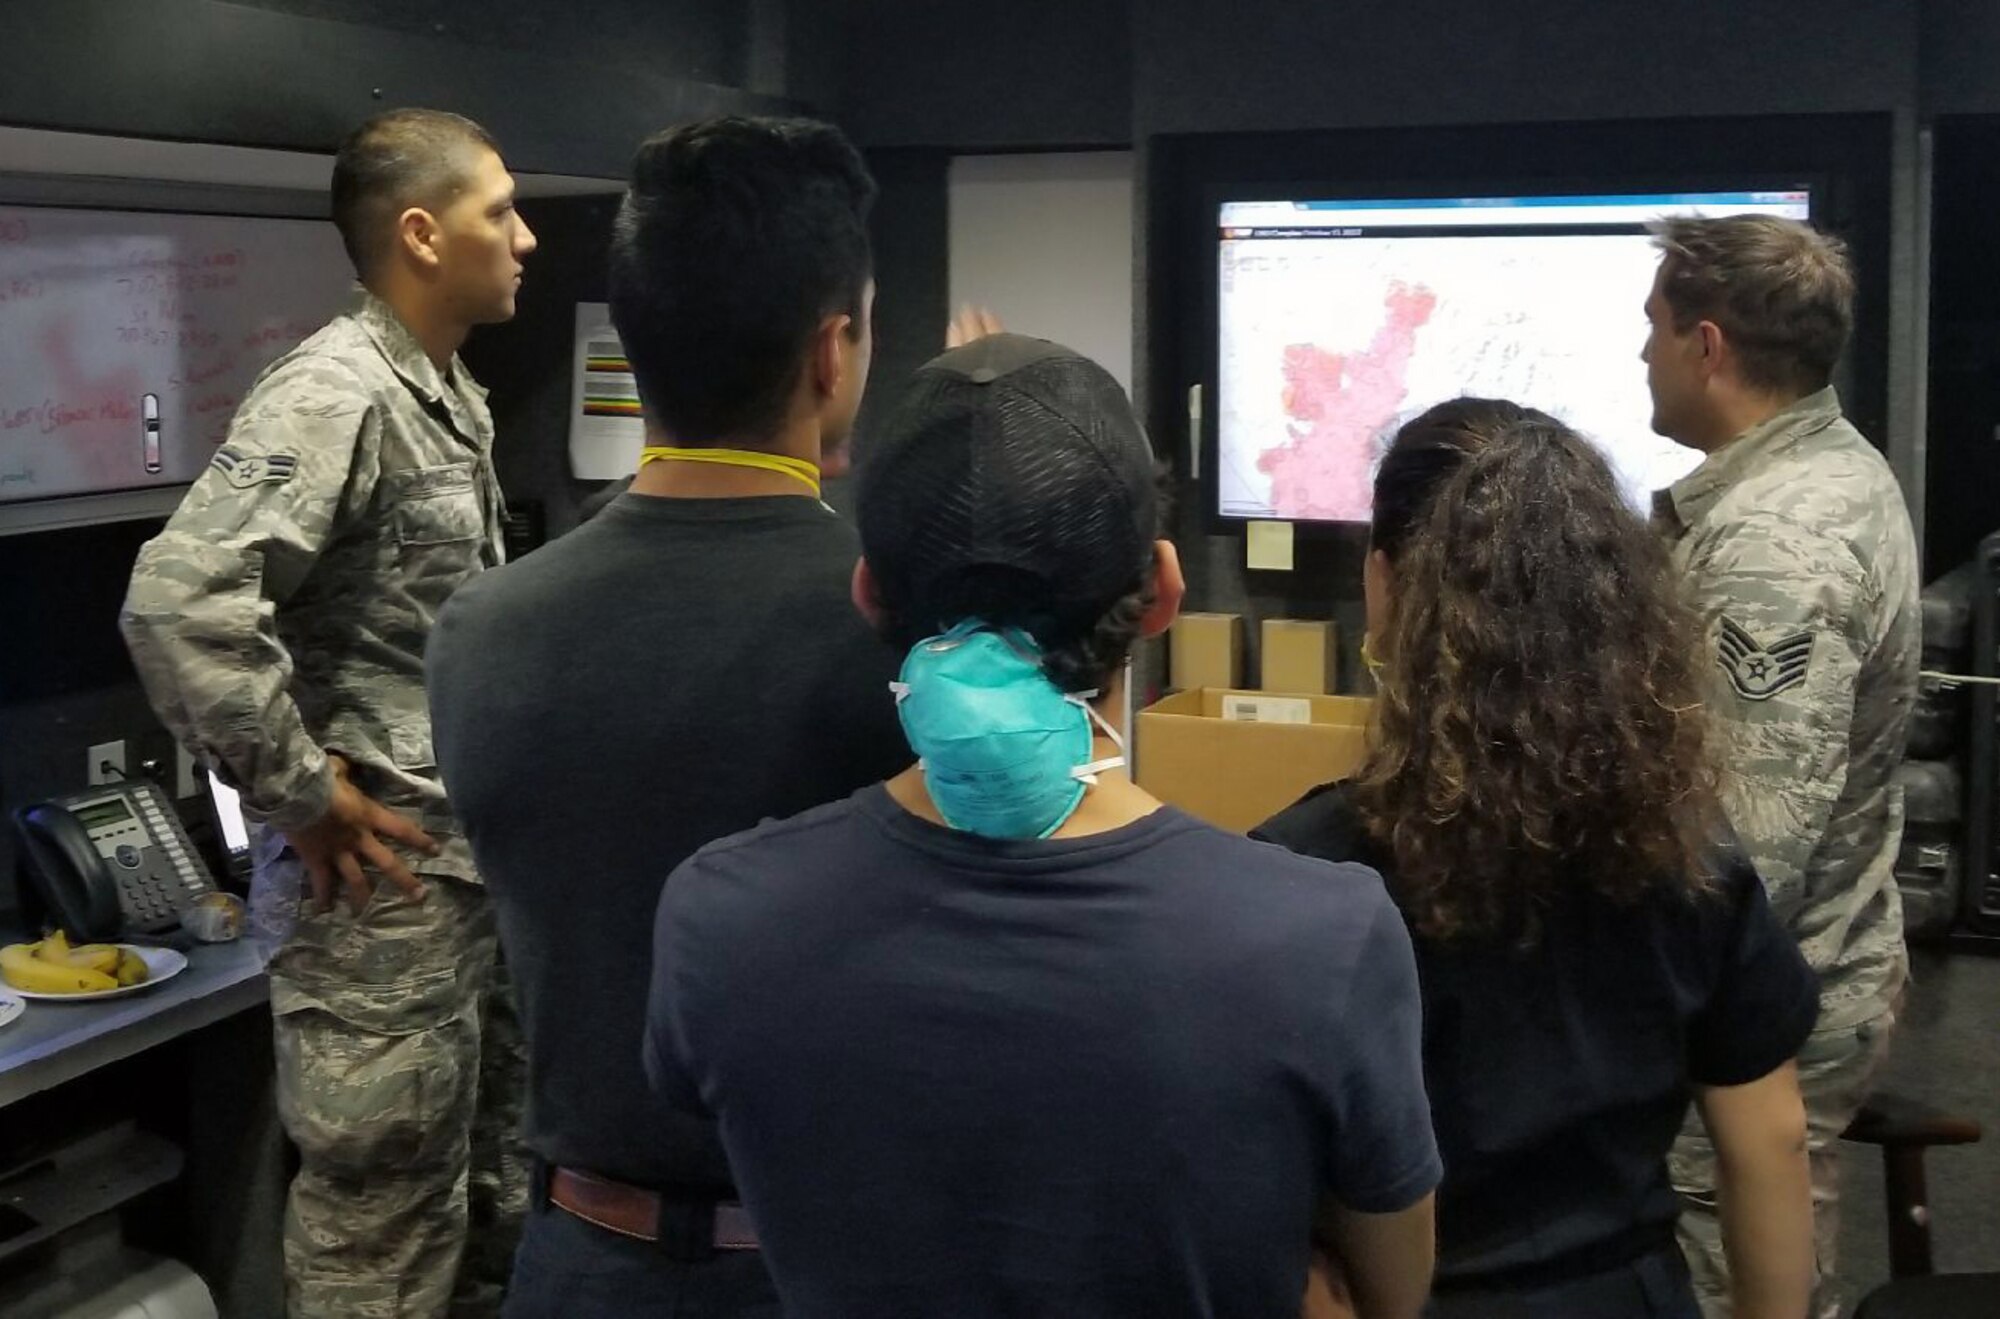 California Air National Guard Airman 1st Class David Ramirez, left, and Staff Sgt. Tyler Crumpton, right, show updated fire maps to evacuees at Napa Valley College in Napa, California, inside a Mobile Emergency Operations Center (MEOC) from the Cal Guard's 163d Attack Wing at March Air Reserve Base, California, Oct. 13, 2017. In addition to sharing updated fire information, the MEOC staff also established wireless internet access and a cell phone network for evacuees who took up shelter in the college gymnasium after a series of wildfires burned through California's wine country. (U.S. Air National Guard photo by Staff Sgt. Hideyoshi Izumi)